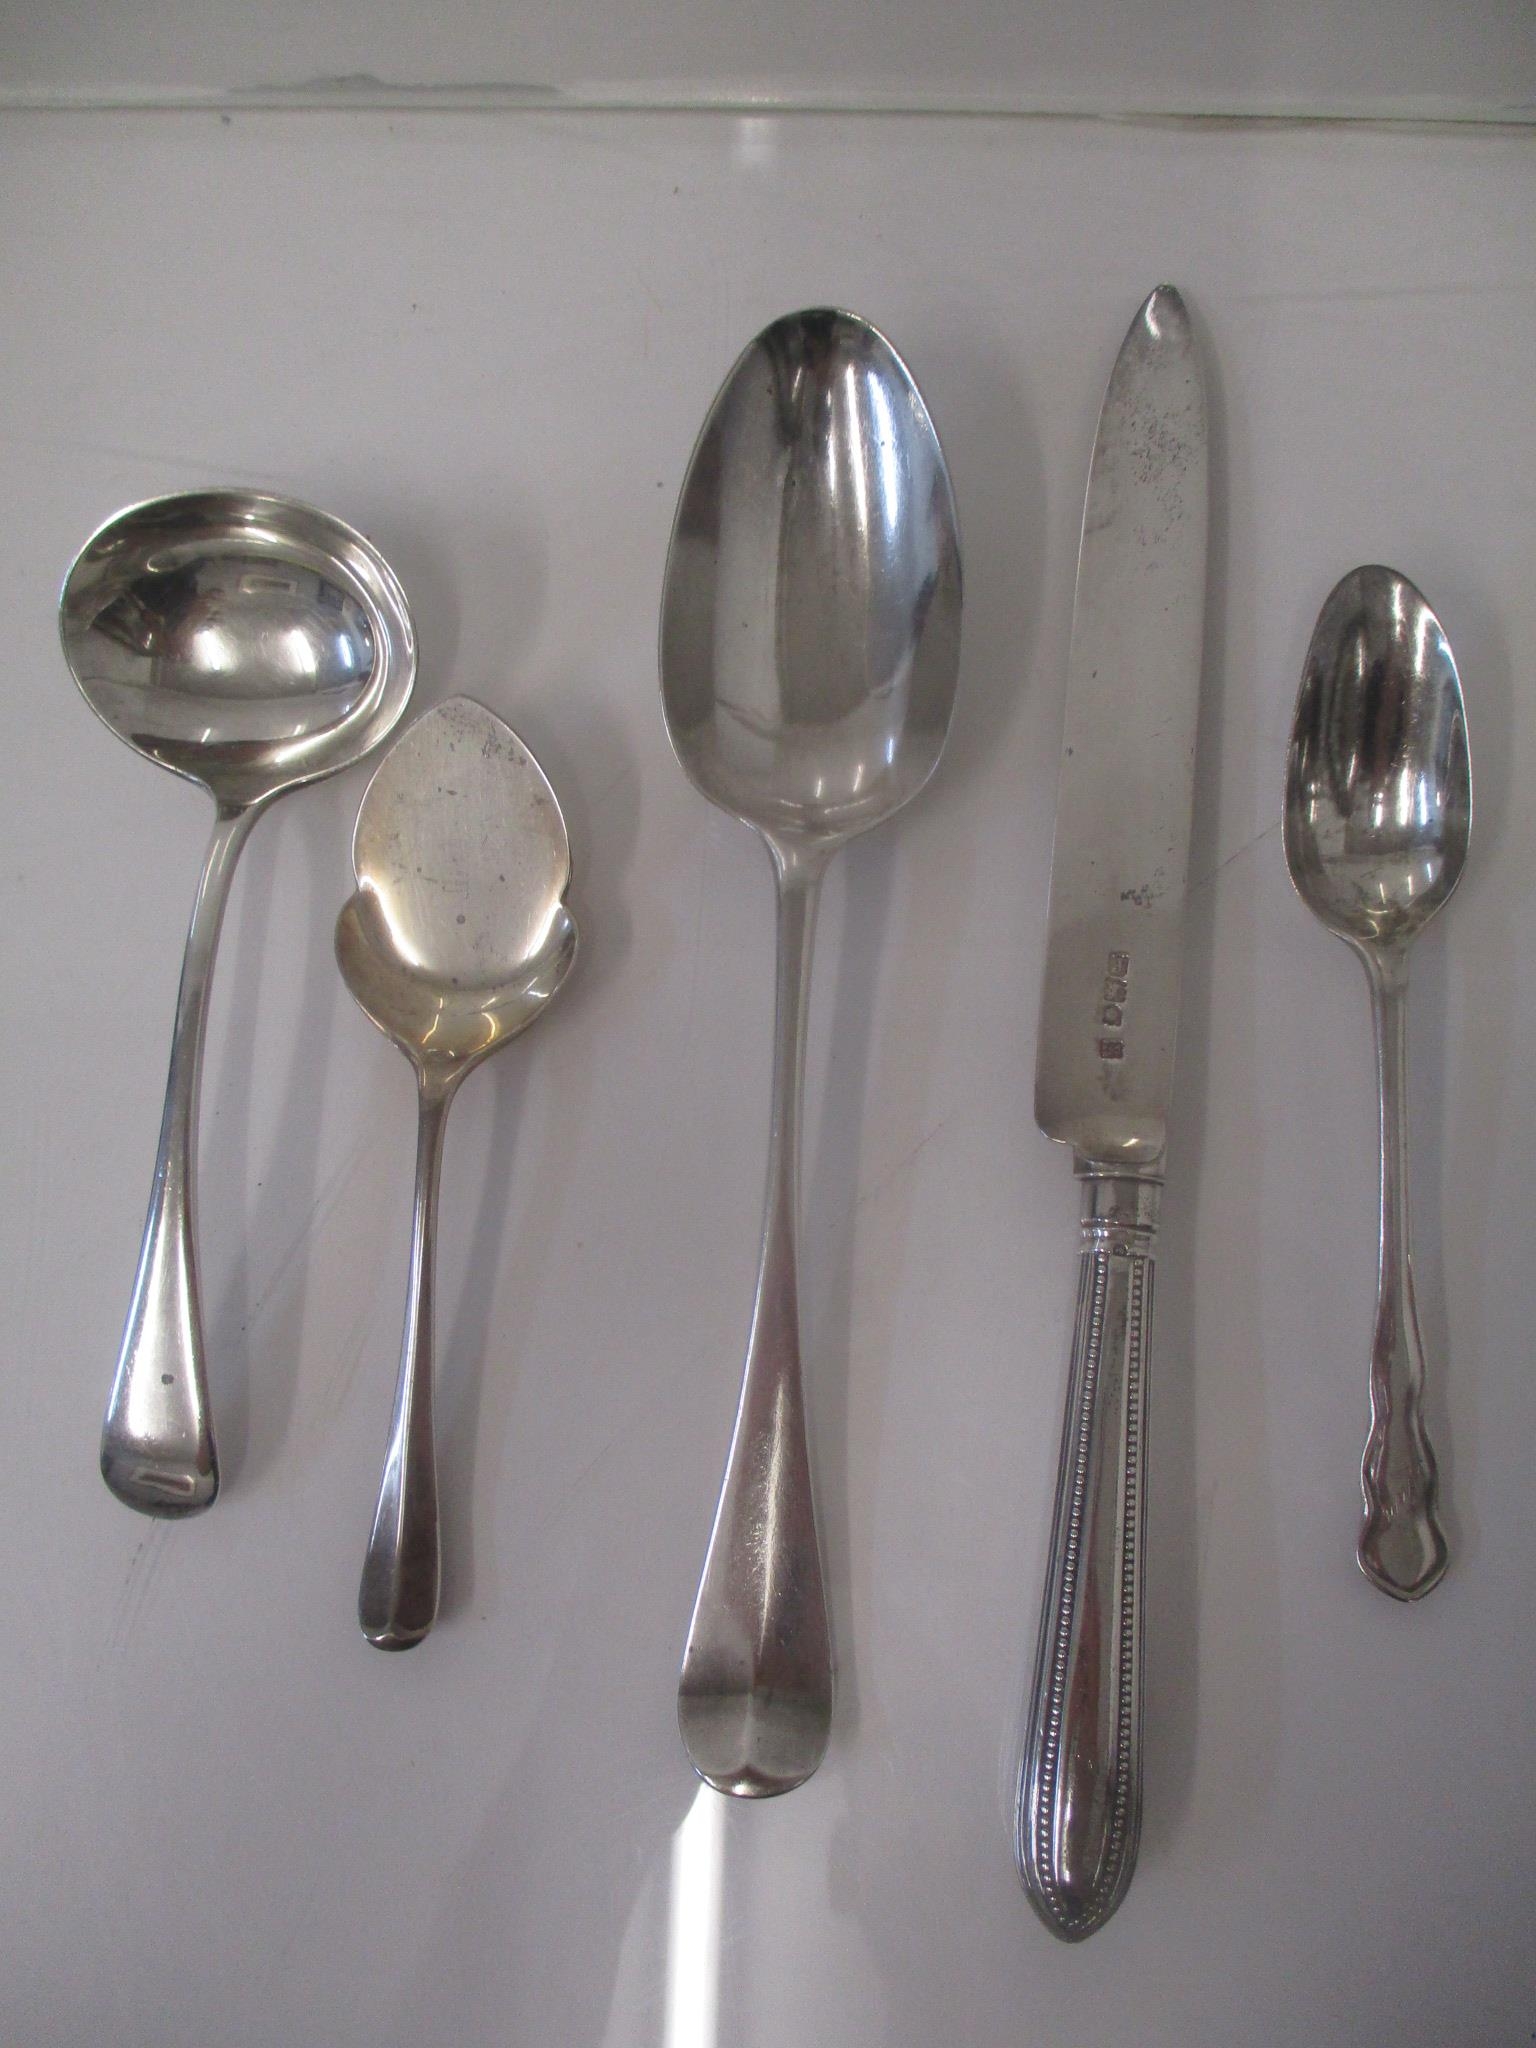 Mixed 19th and 20th century silver to include a preserve spoon, a sauce ladle, a serving spoon and a